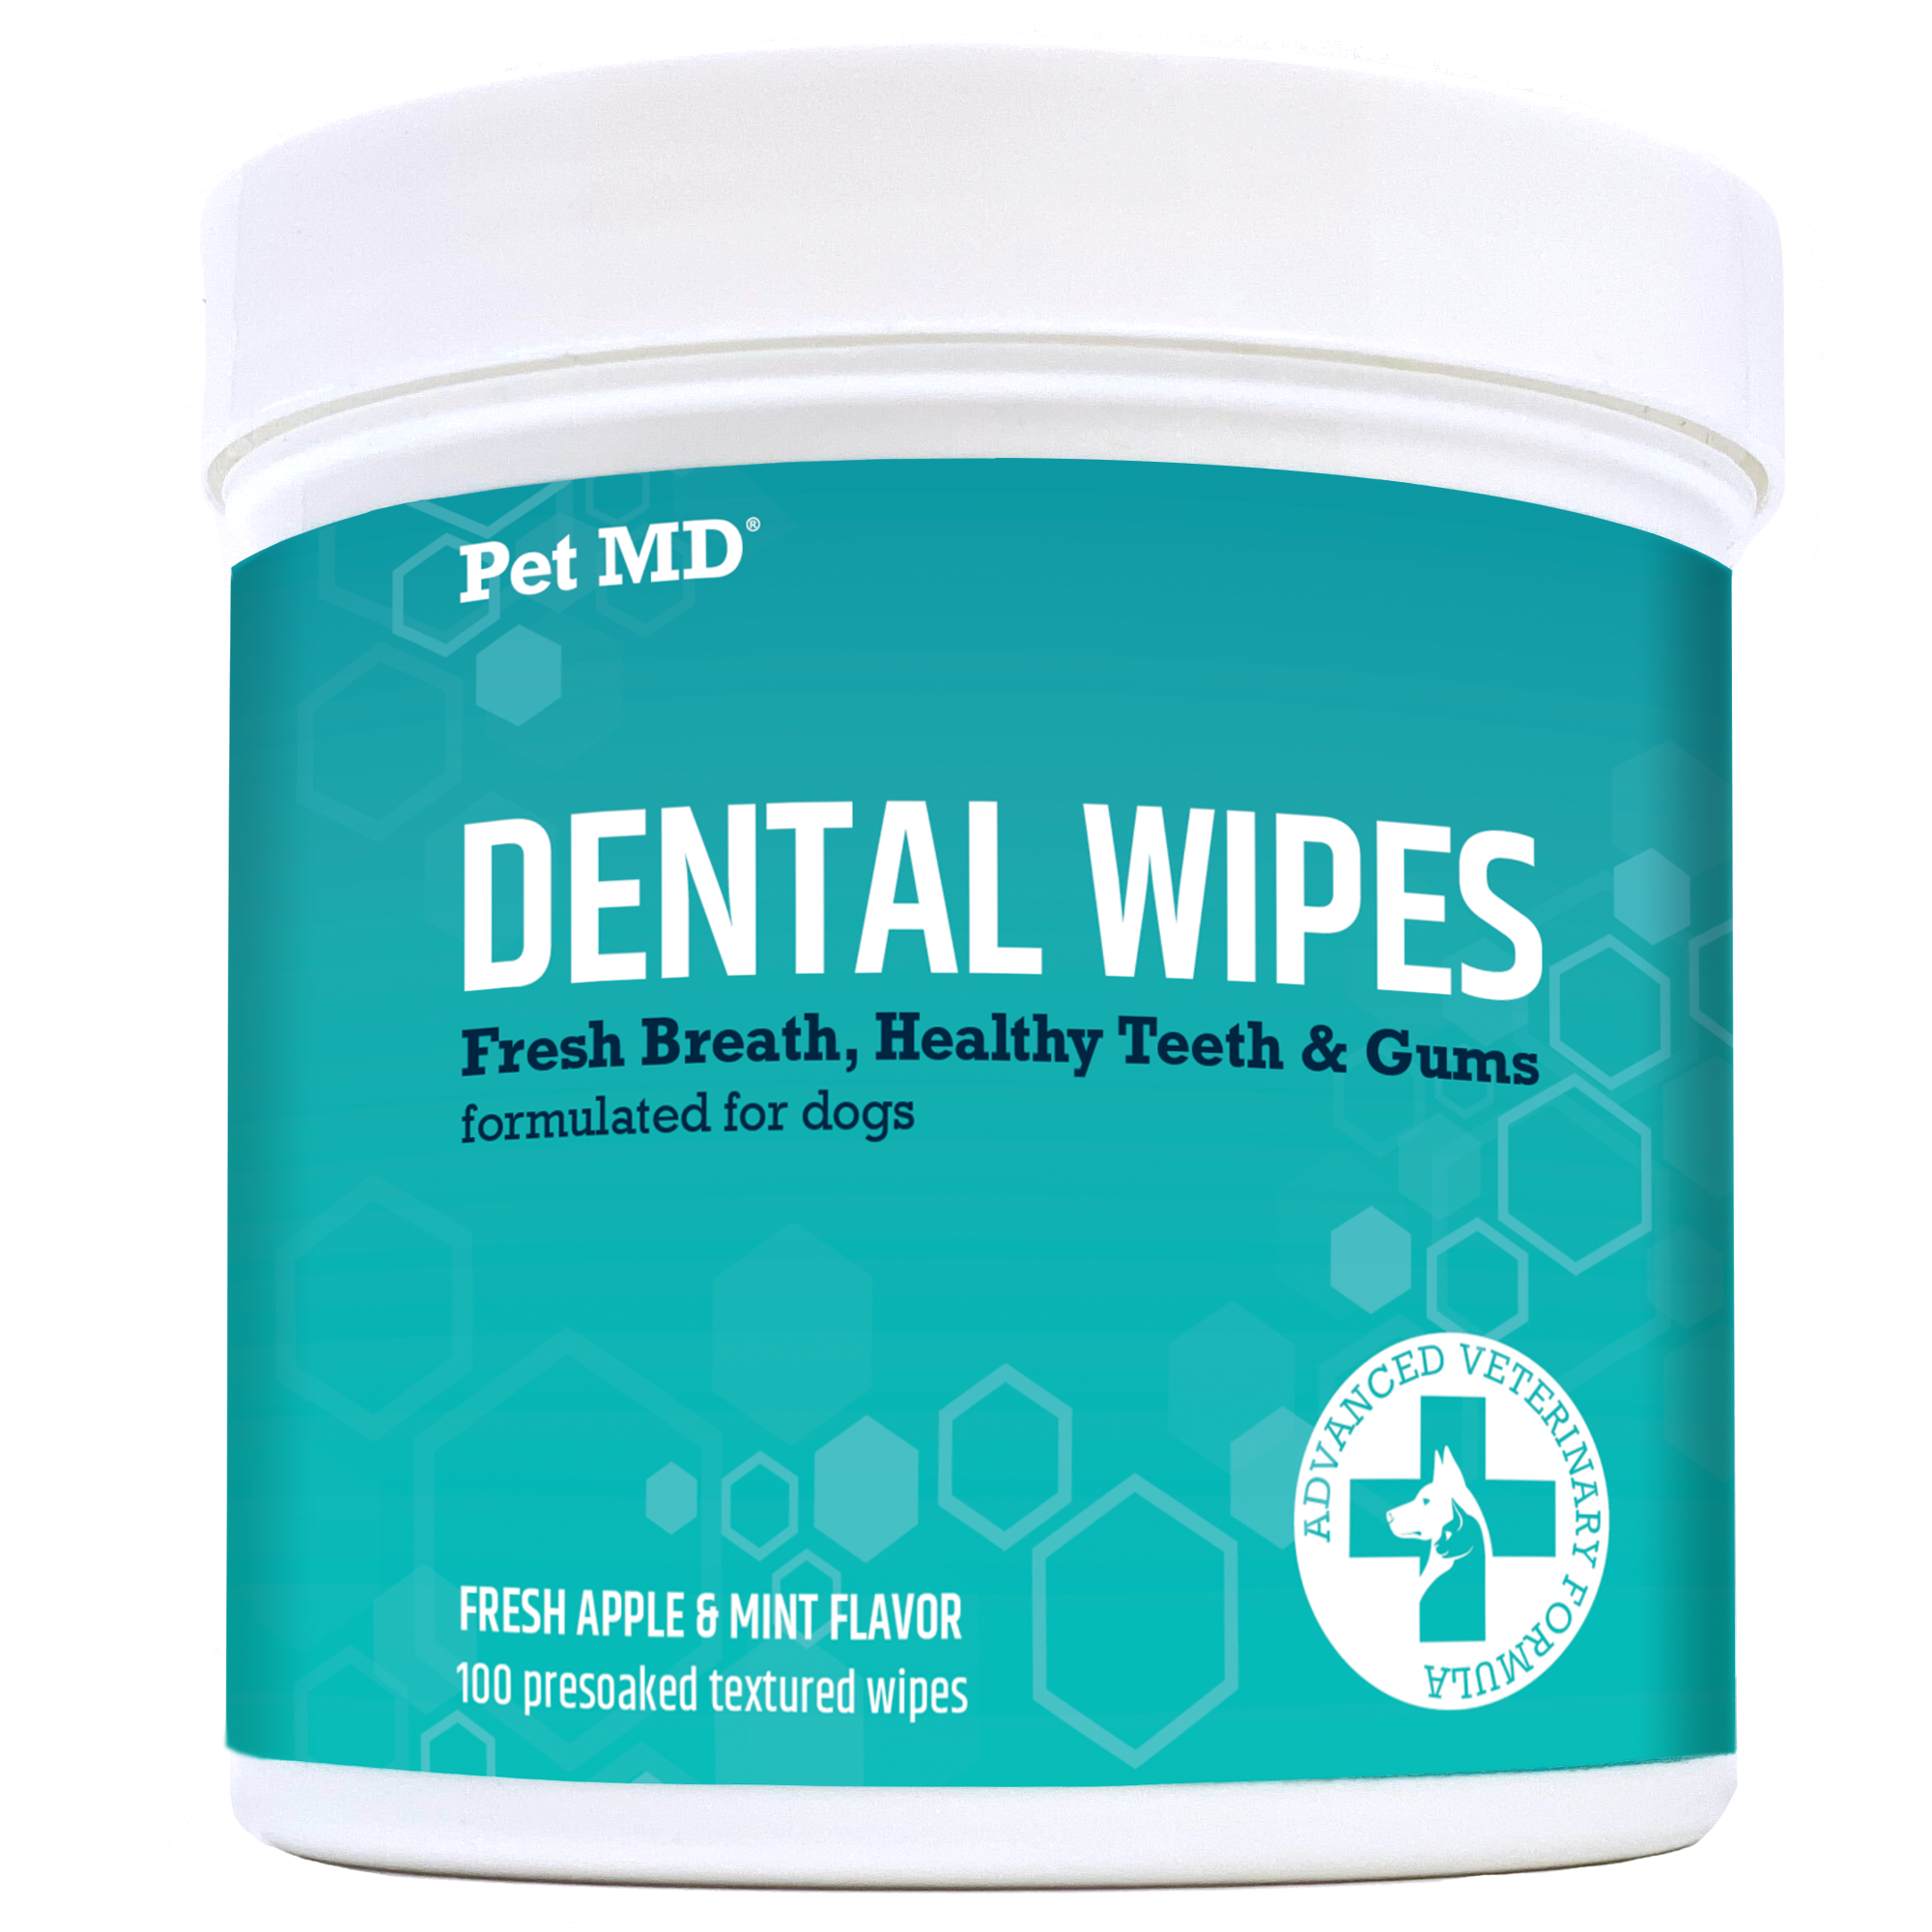 Dental Wipes for Dogs - 100 Count